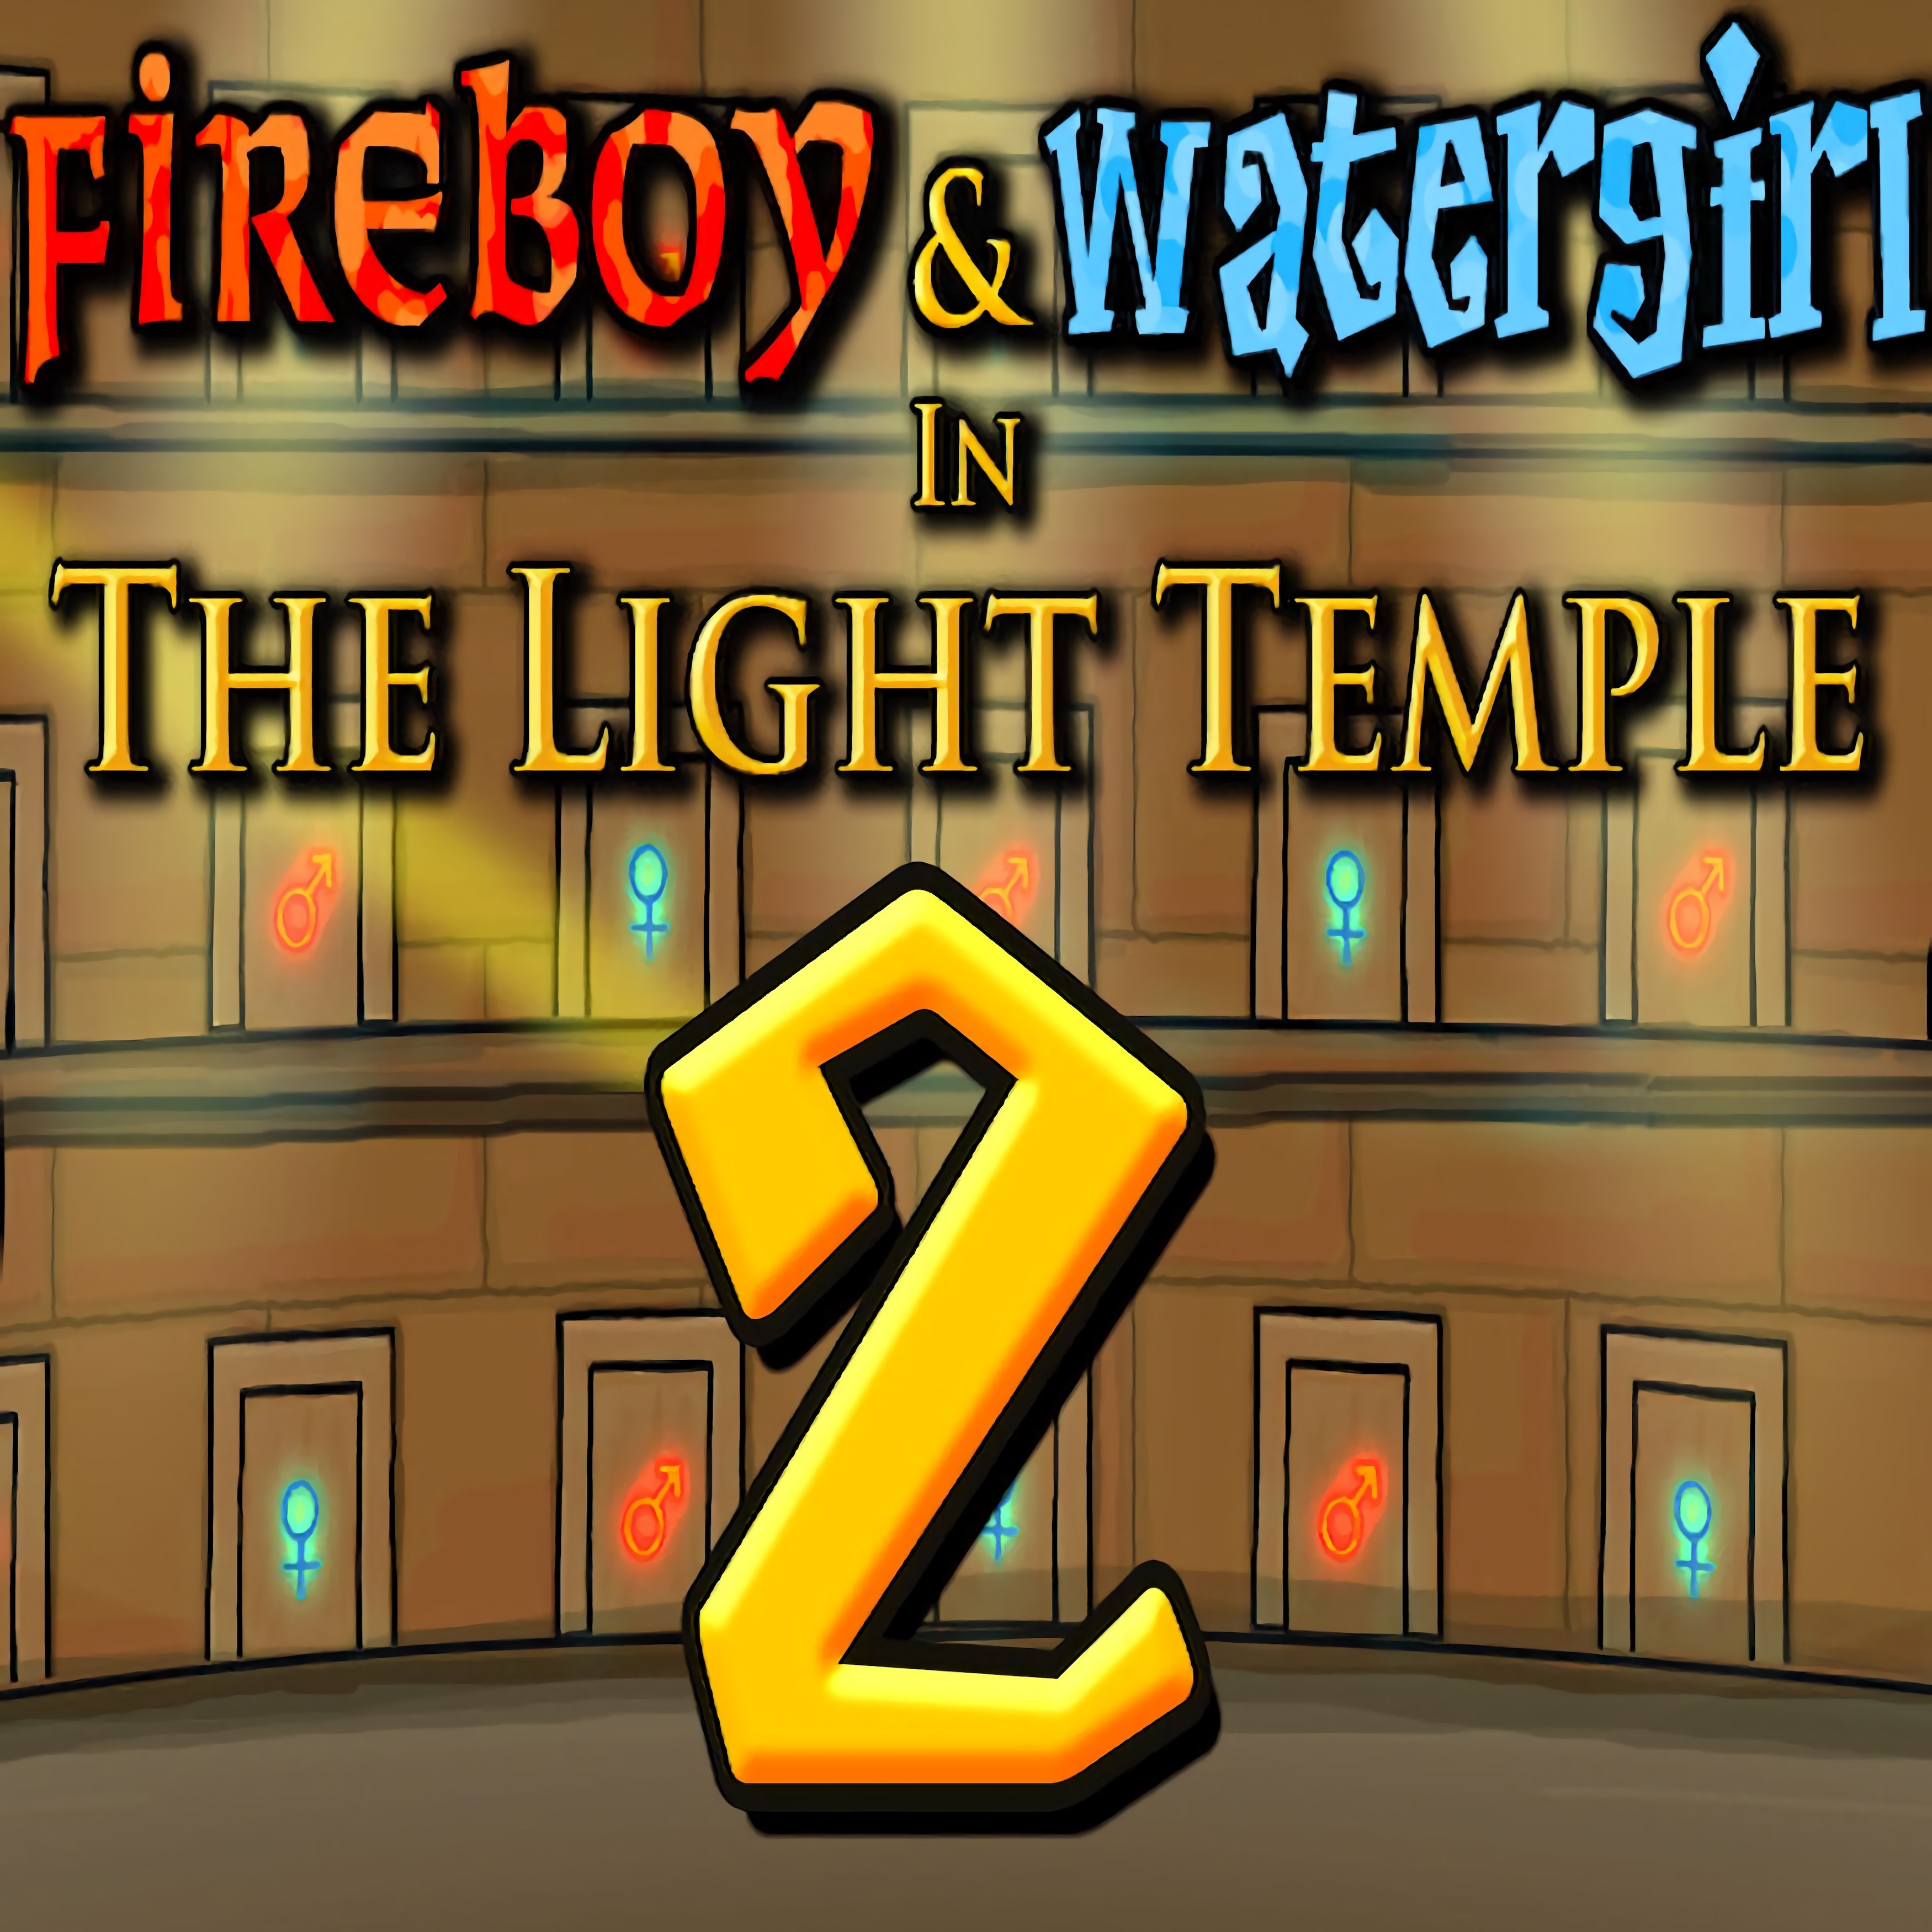 Play Fireboy and Watergirl 2: Light Temple online for Free on PC & Mobile